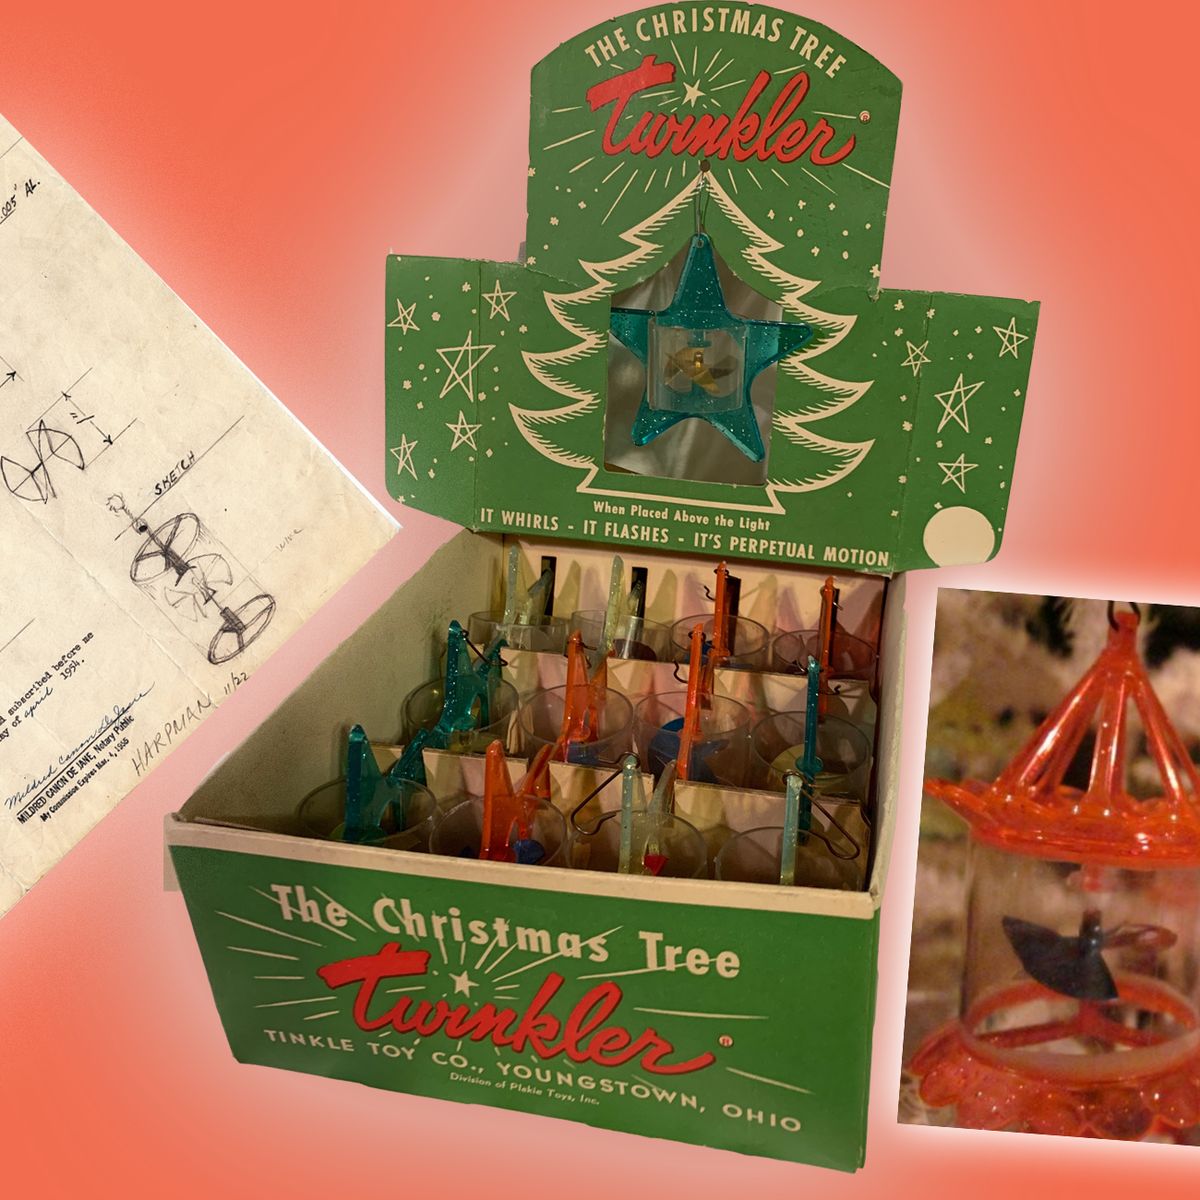 The History Behind Vintage Christmas Ornaments - Vintage Christmas  Decorations